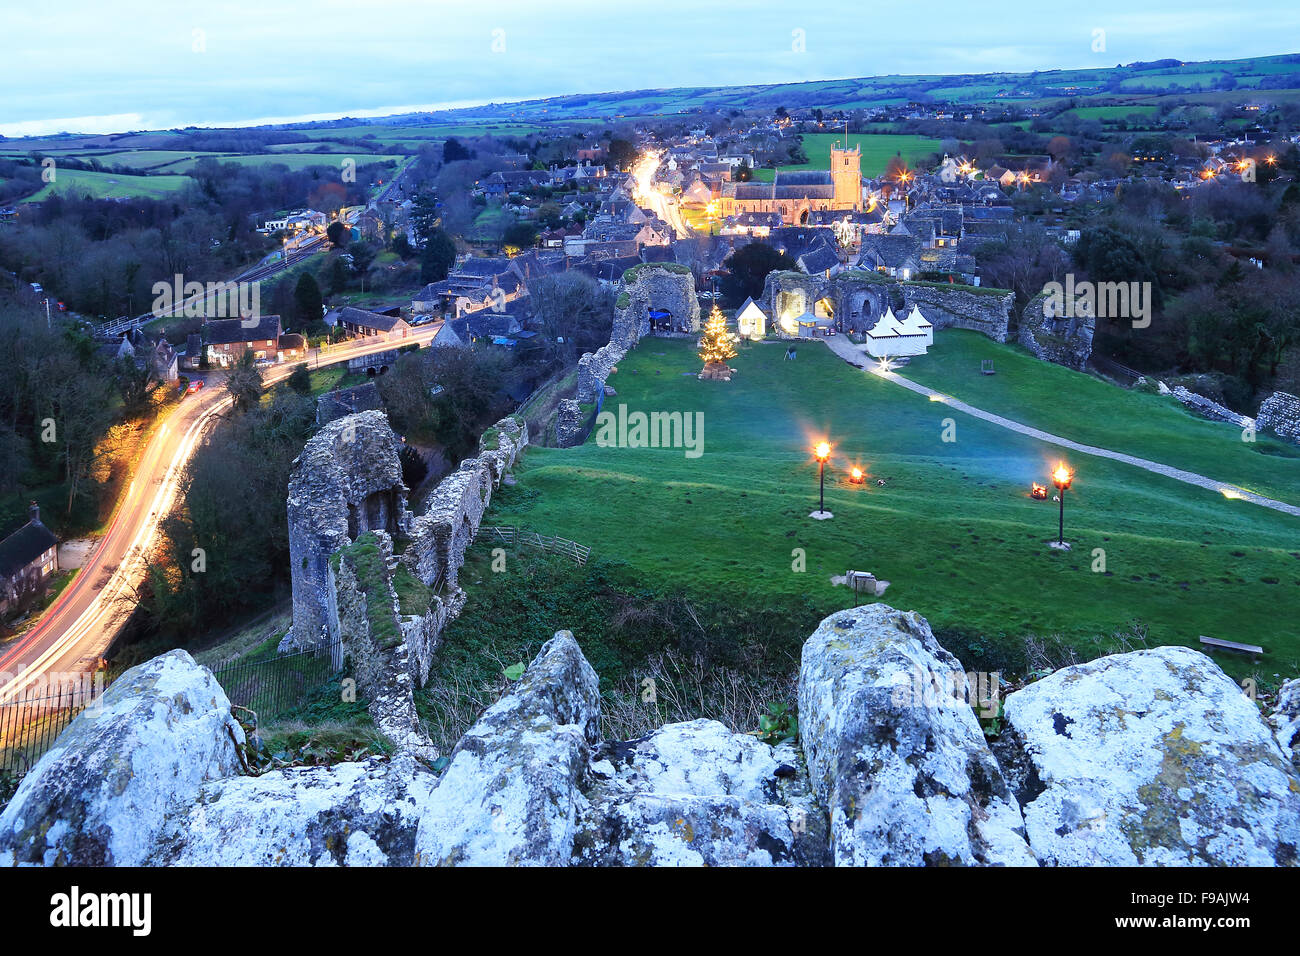 Corfe village from the Castle at night Stock Photo